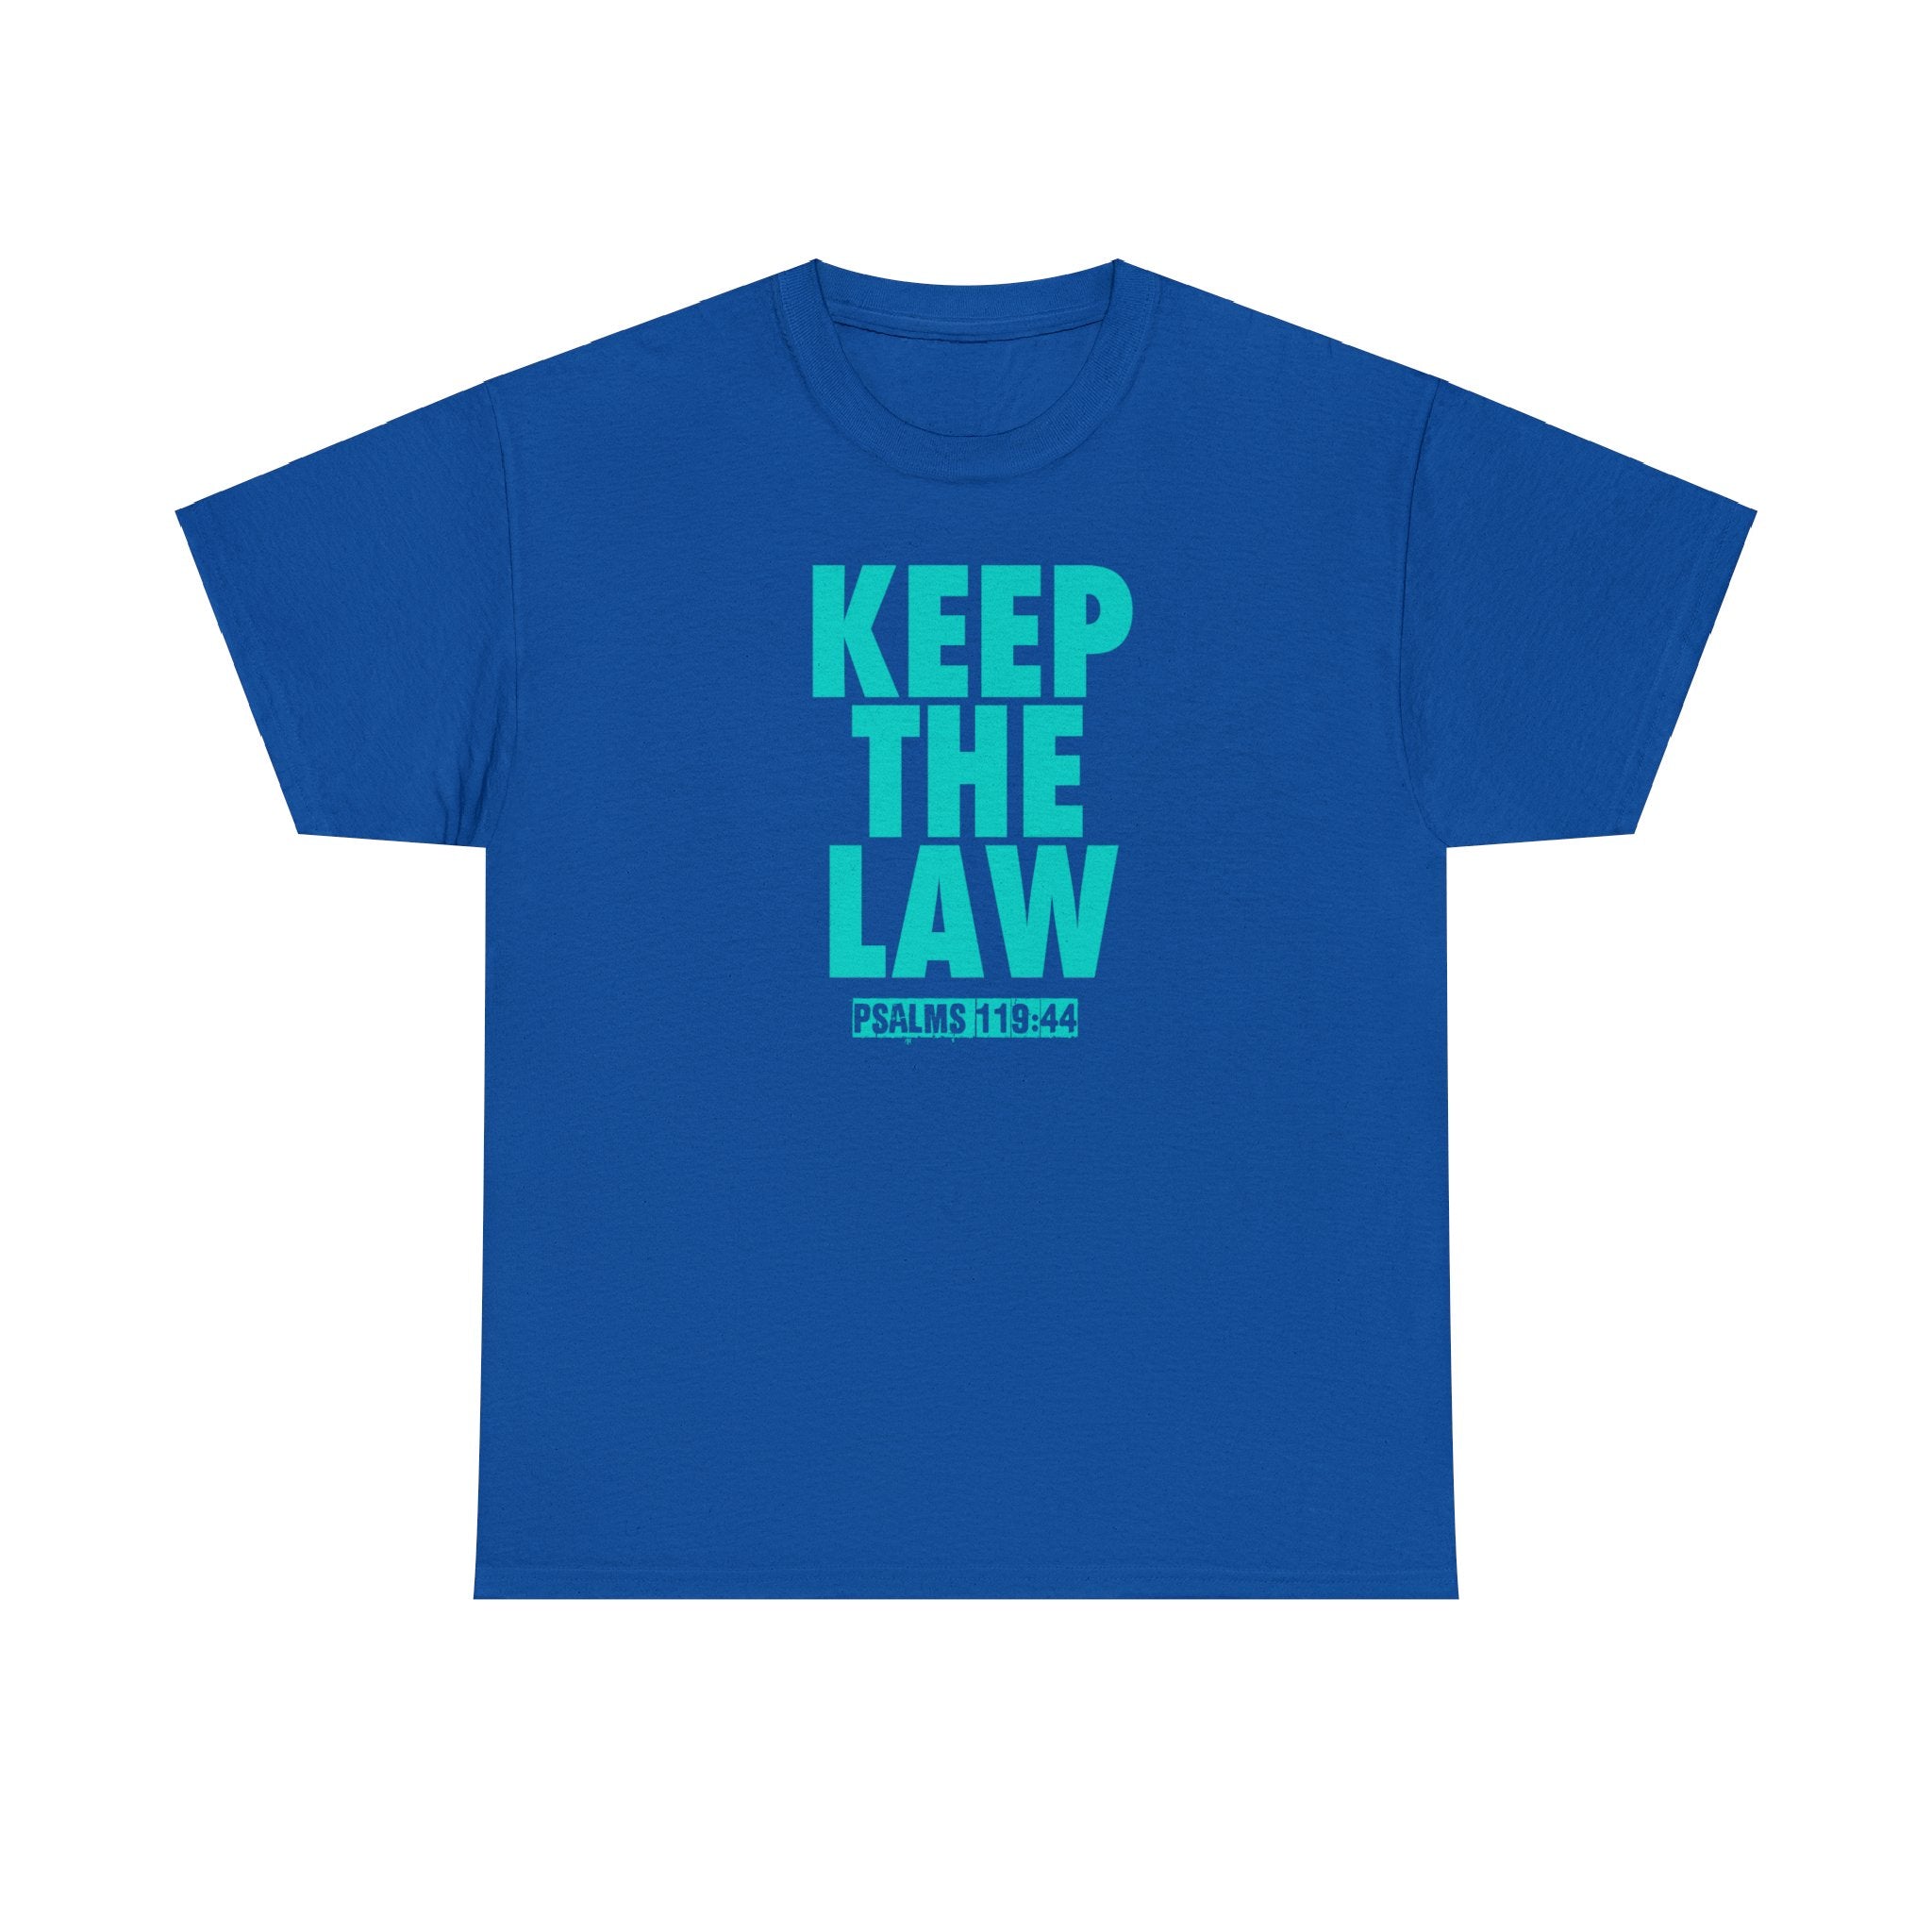 KEEP THE LAW TEAL